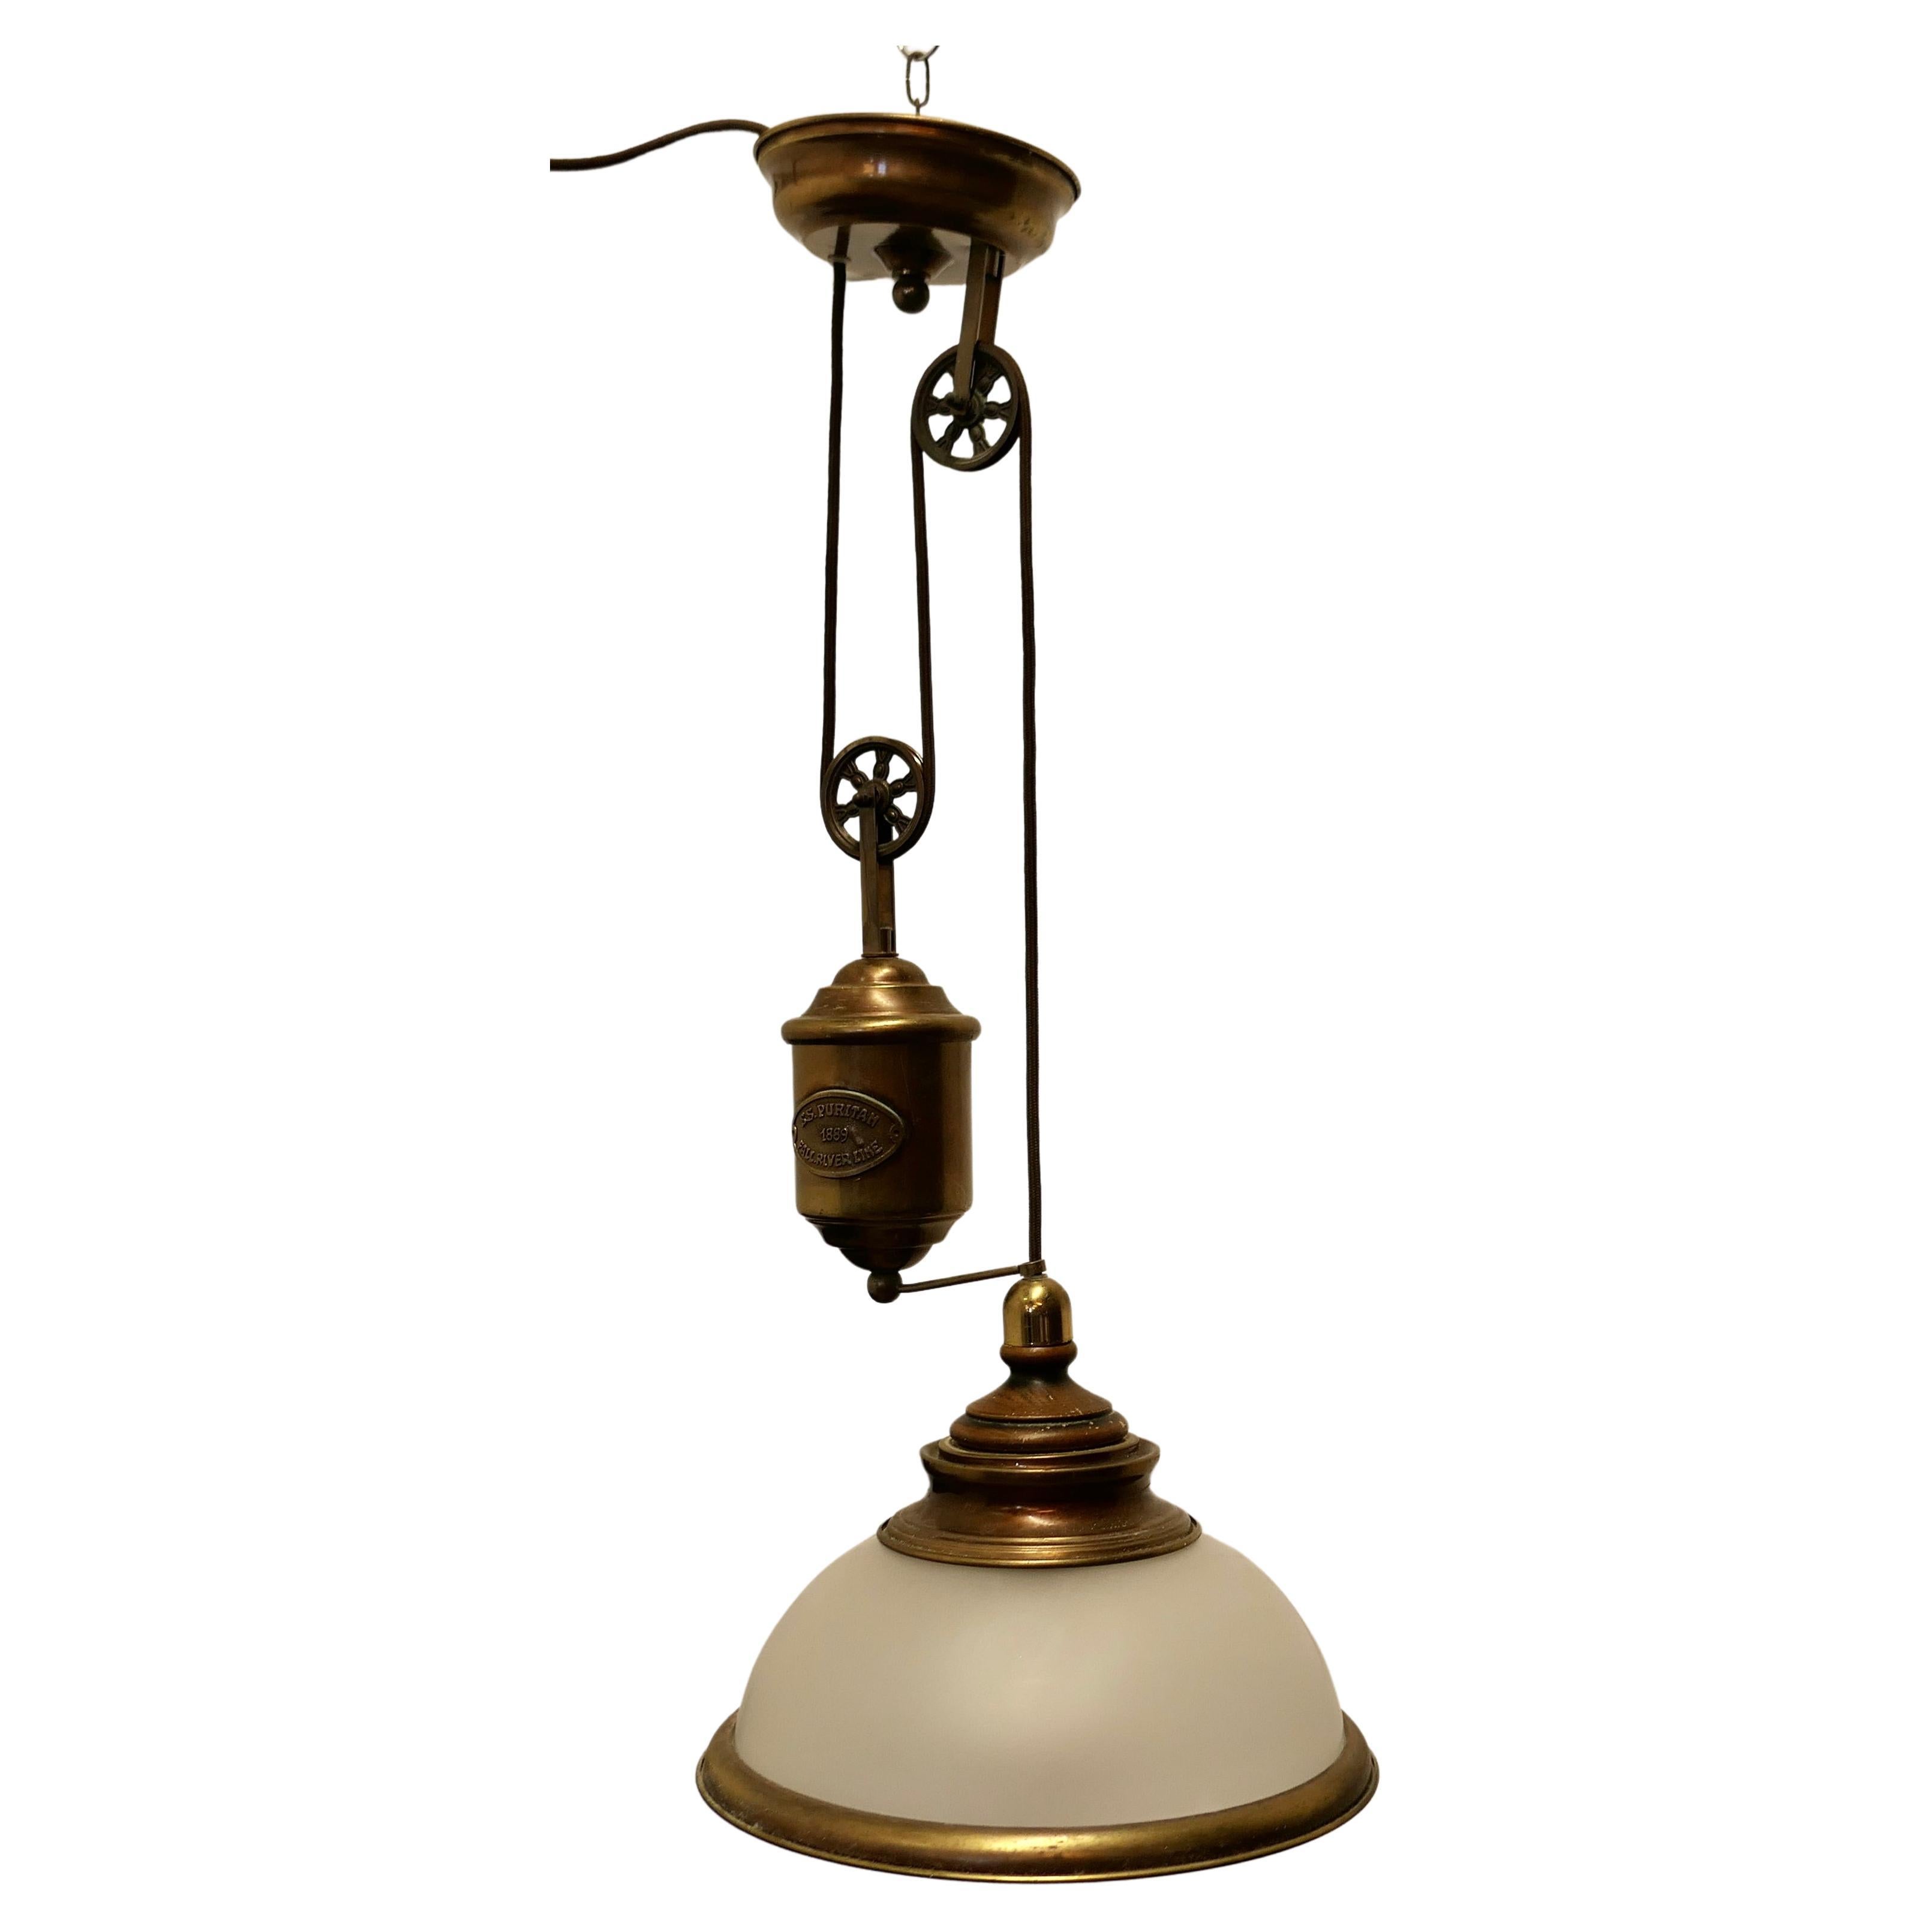 Rising and Lowering Large Brass Ceiling Light